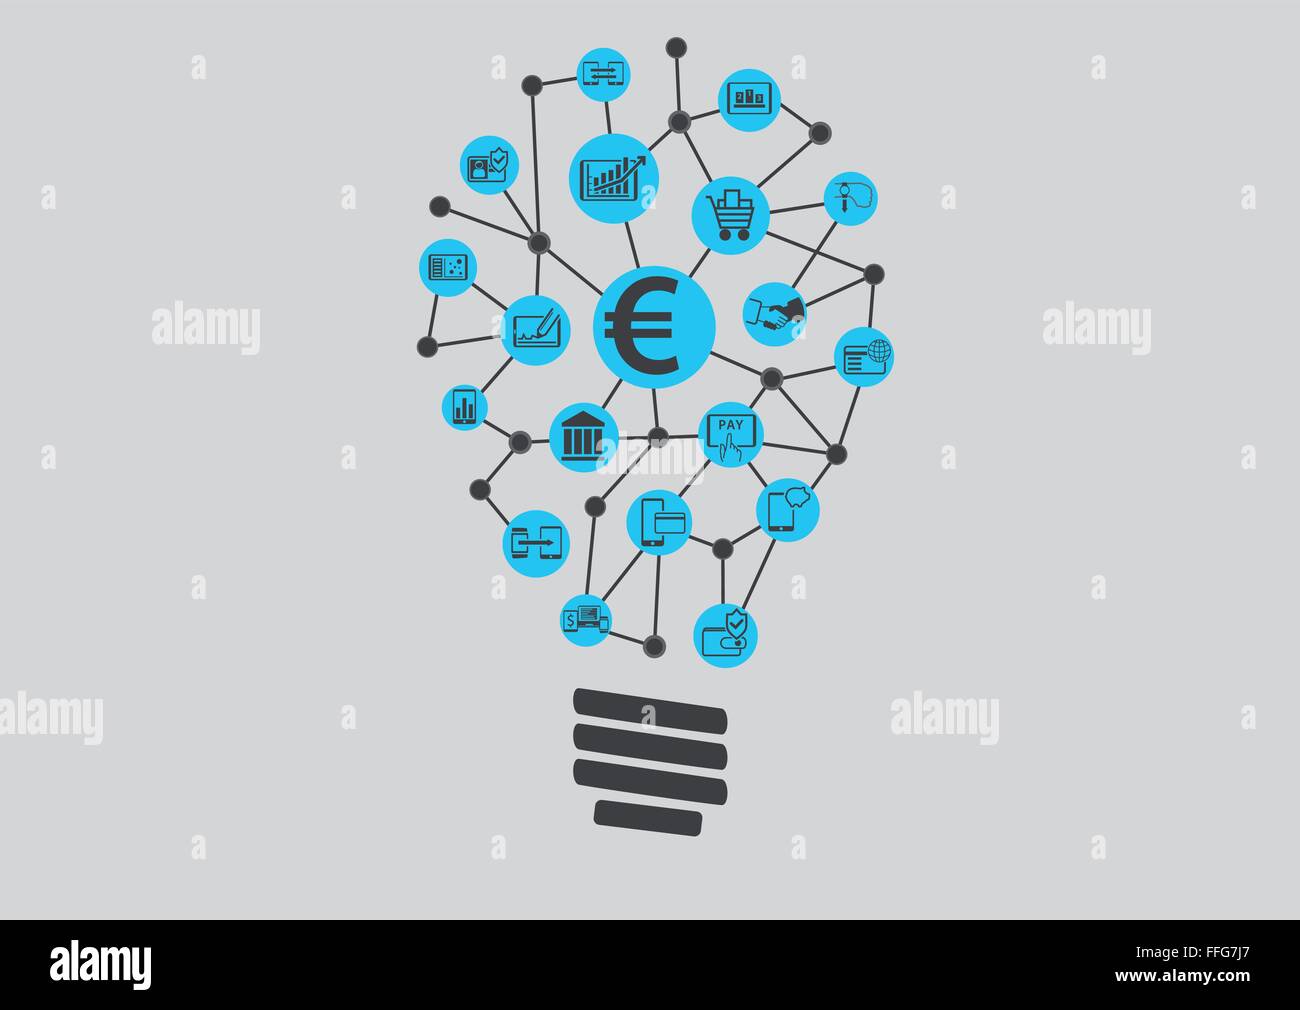 New digital technology within financial services business. Creative idea finding represented by light bulb. Stock Vector